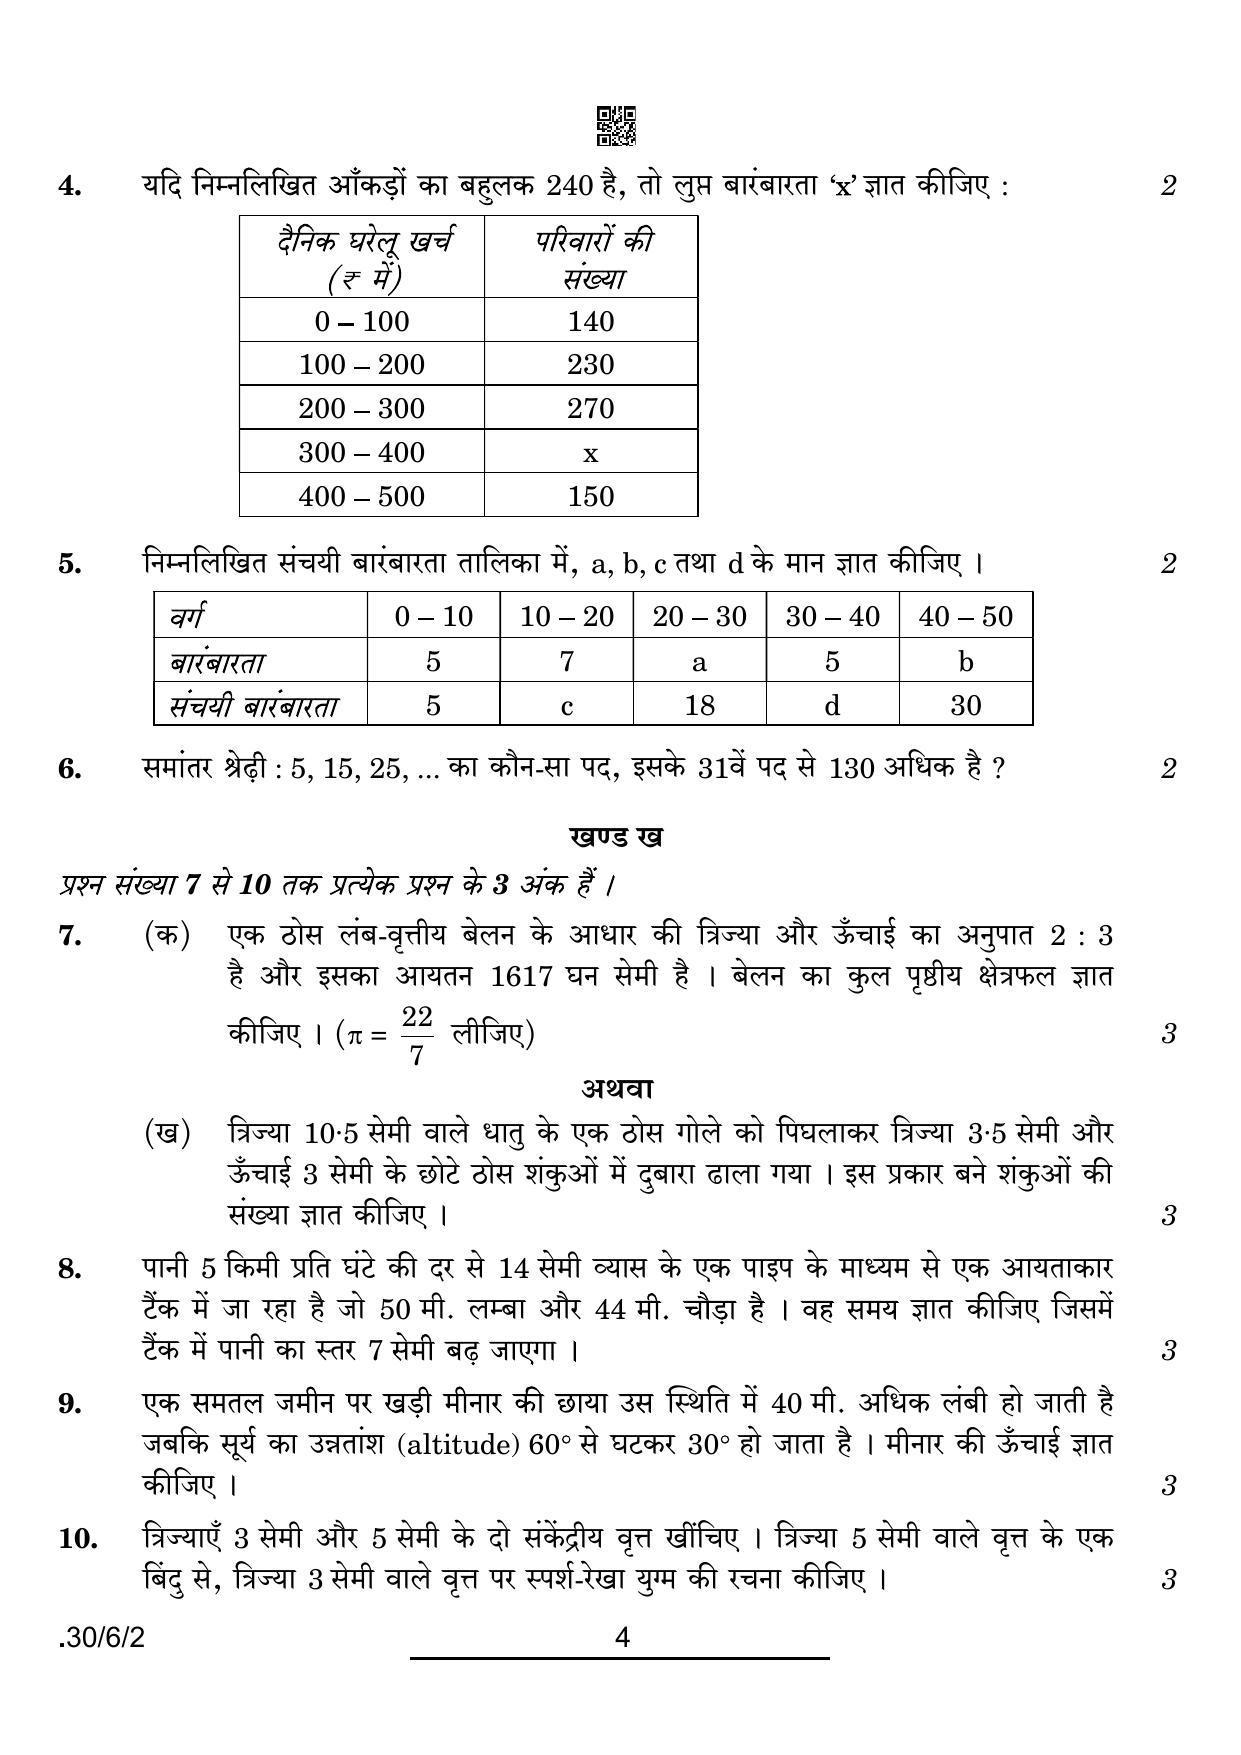 CBSE Class 10 30-6-2 Maths Std. 2022 Compartment Question Paper - Page 4